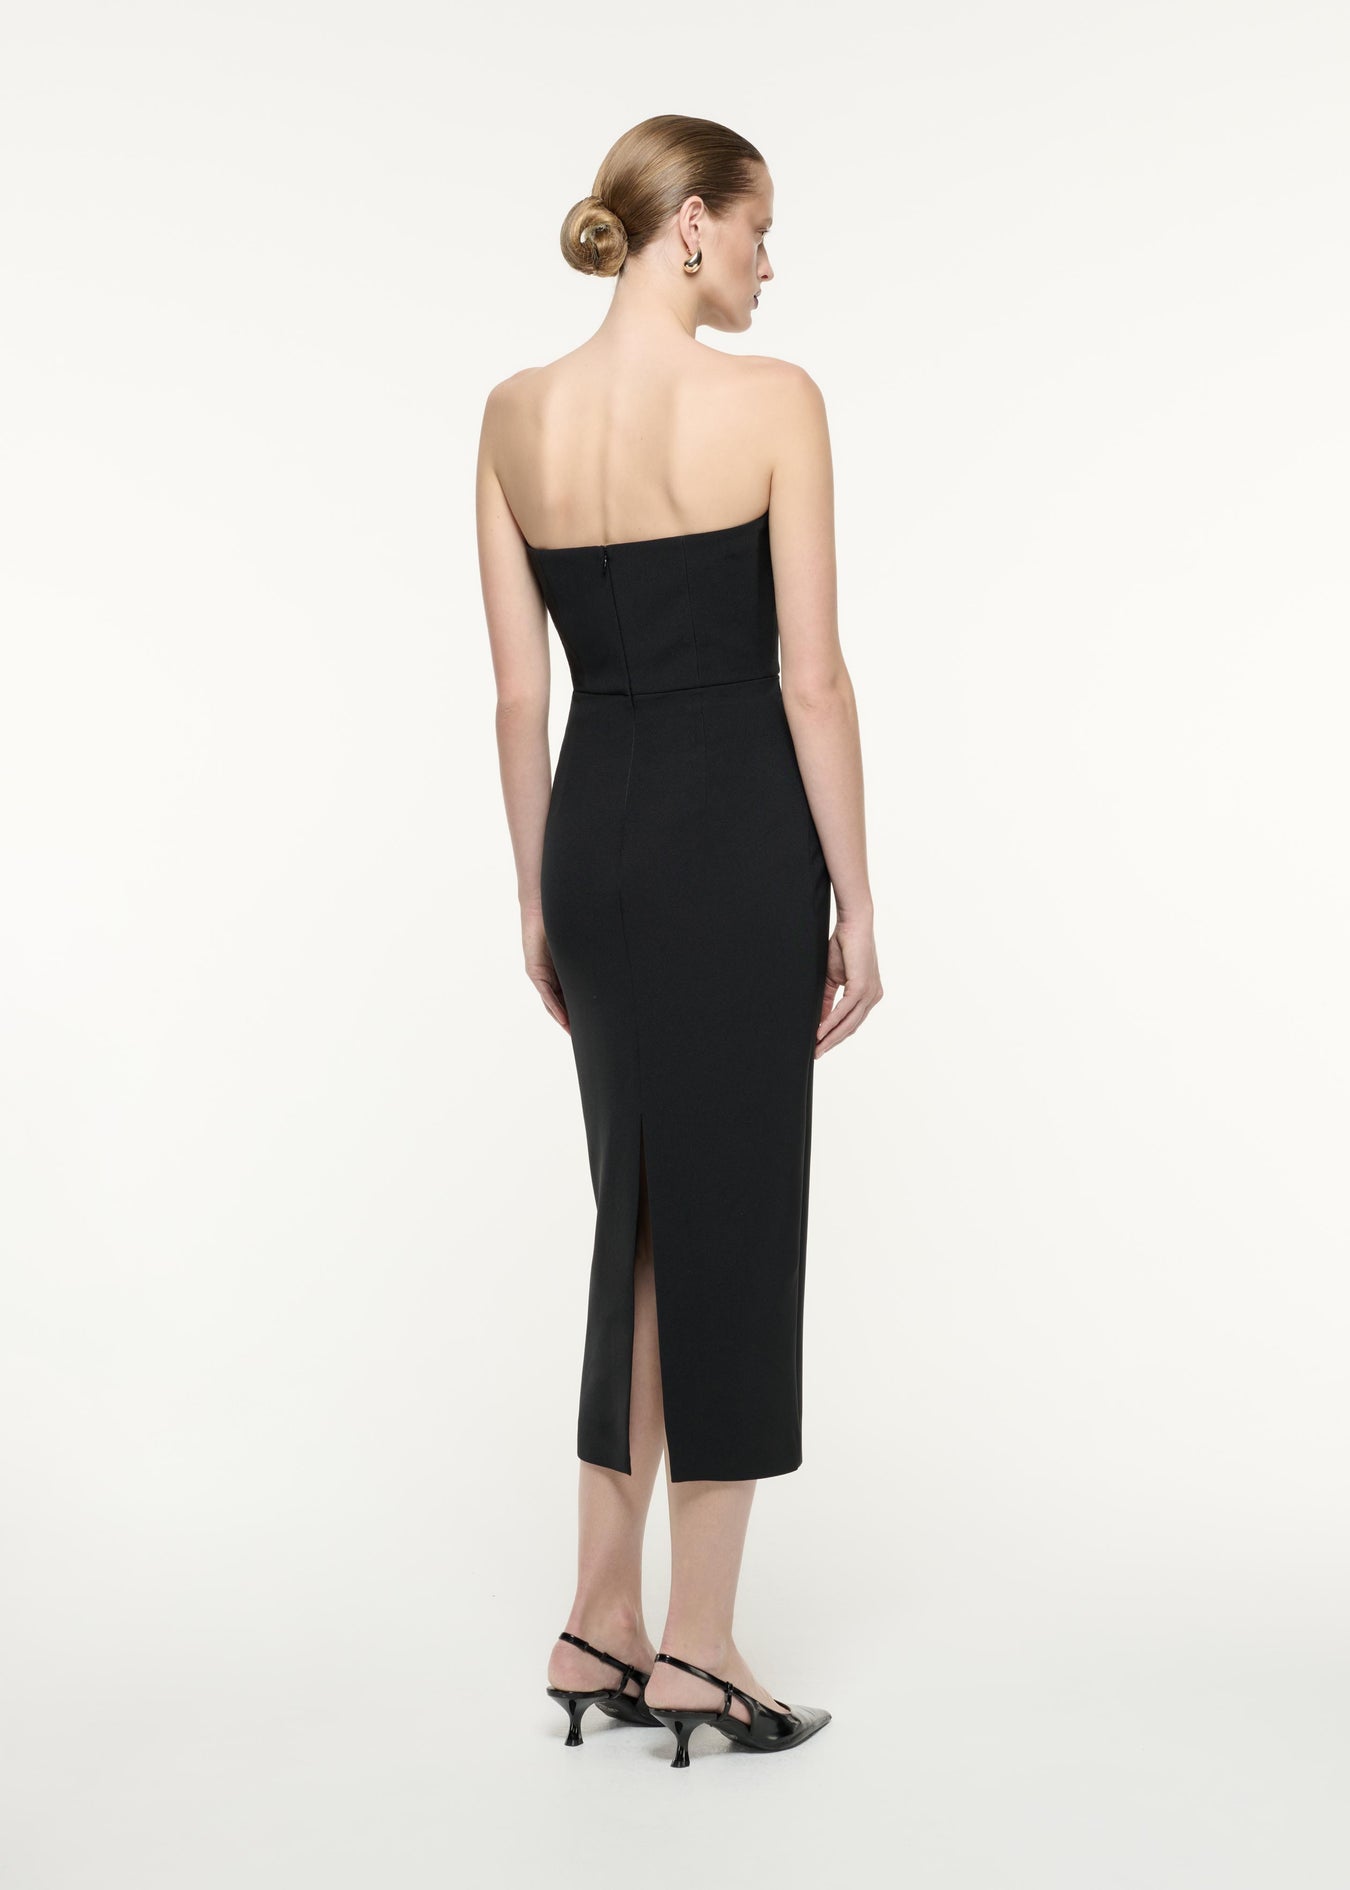 A back view image of a model wearing the Strapless Crepe Midi Dress in Black